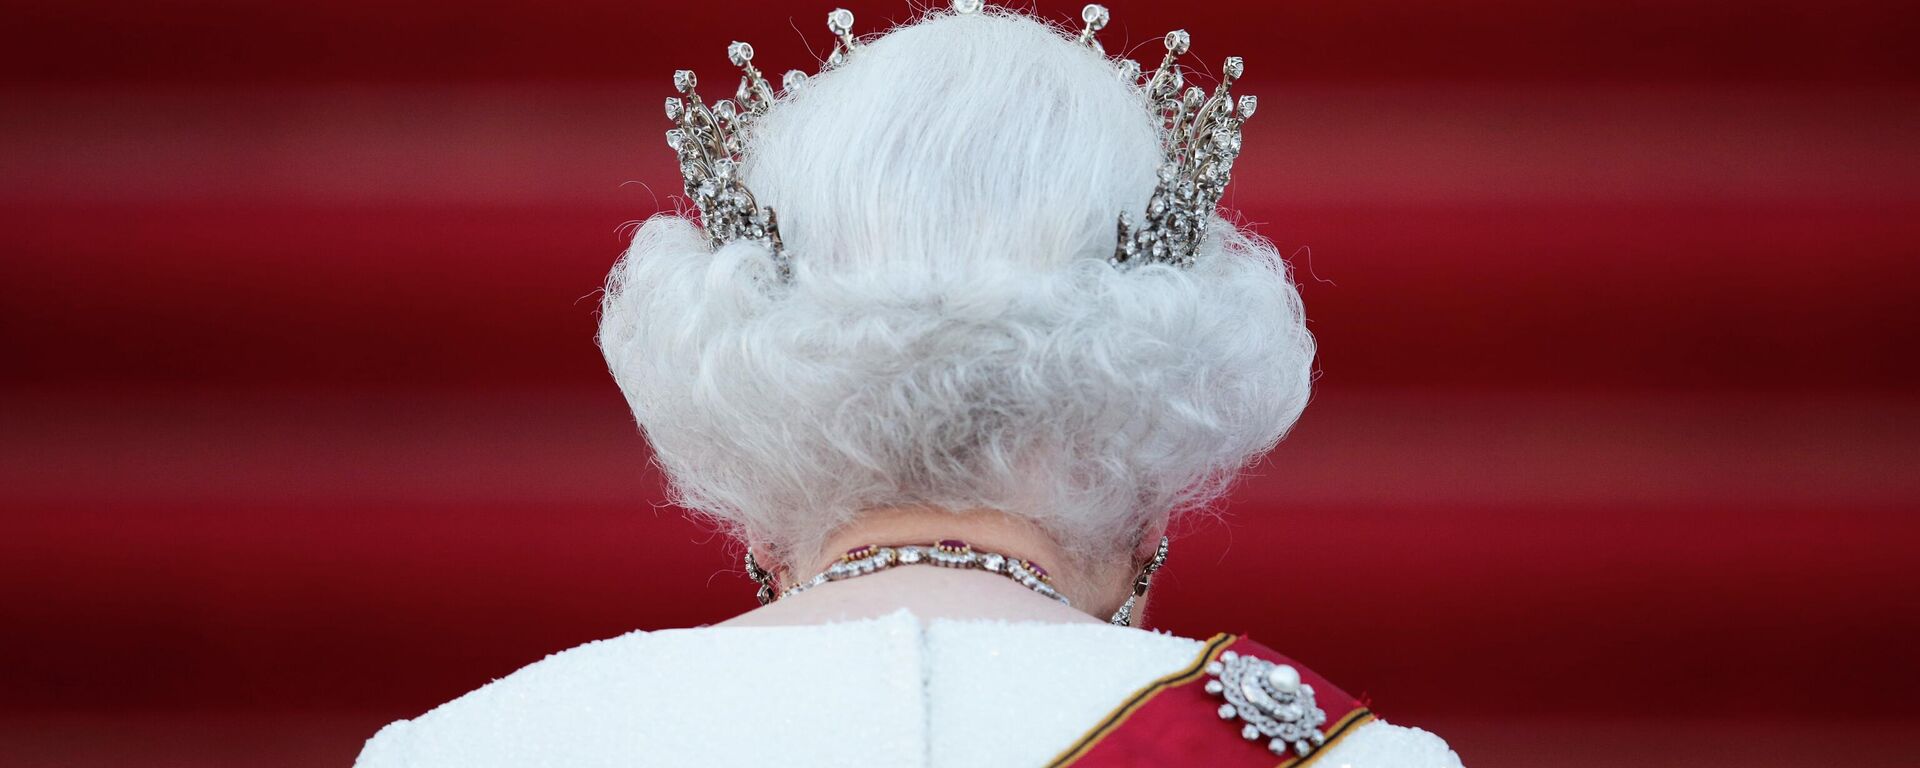 FILE - In this June 24, 2015 file photo Britain's Queen Elizabeth II arrives for an official state dinner, in front of Germany's President Joachim Gauck's residence Bellevue Palace in Berlin. Queen Elizabeth II, Britain’s longest-reigning monarch and a rock of stability across much of a turbulent century, has died. She was 96. Buckingham Palace made the announcement in a statement on Thursday Sept. 8, 2022. - Sputnik International, 1920, 08.09.2022